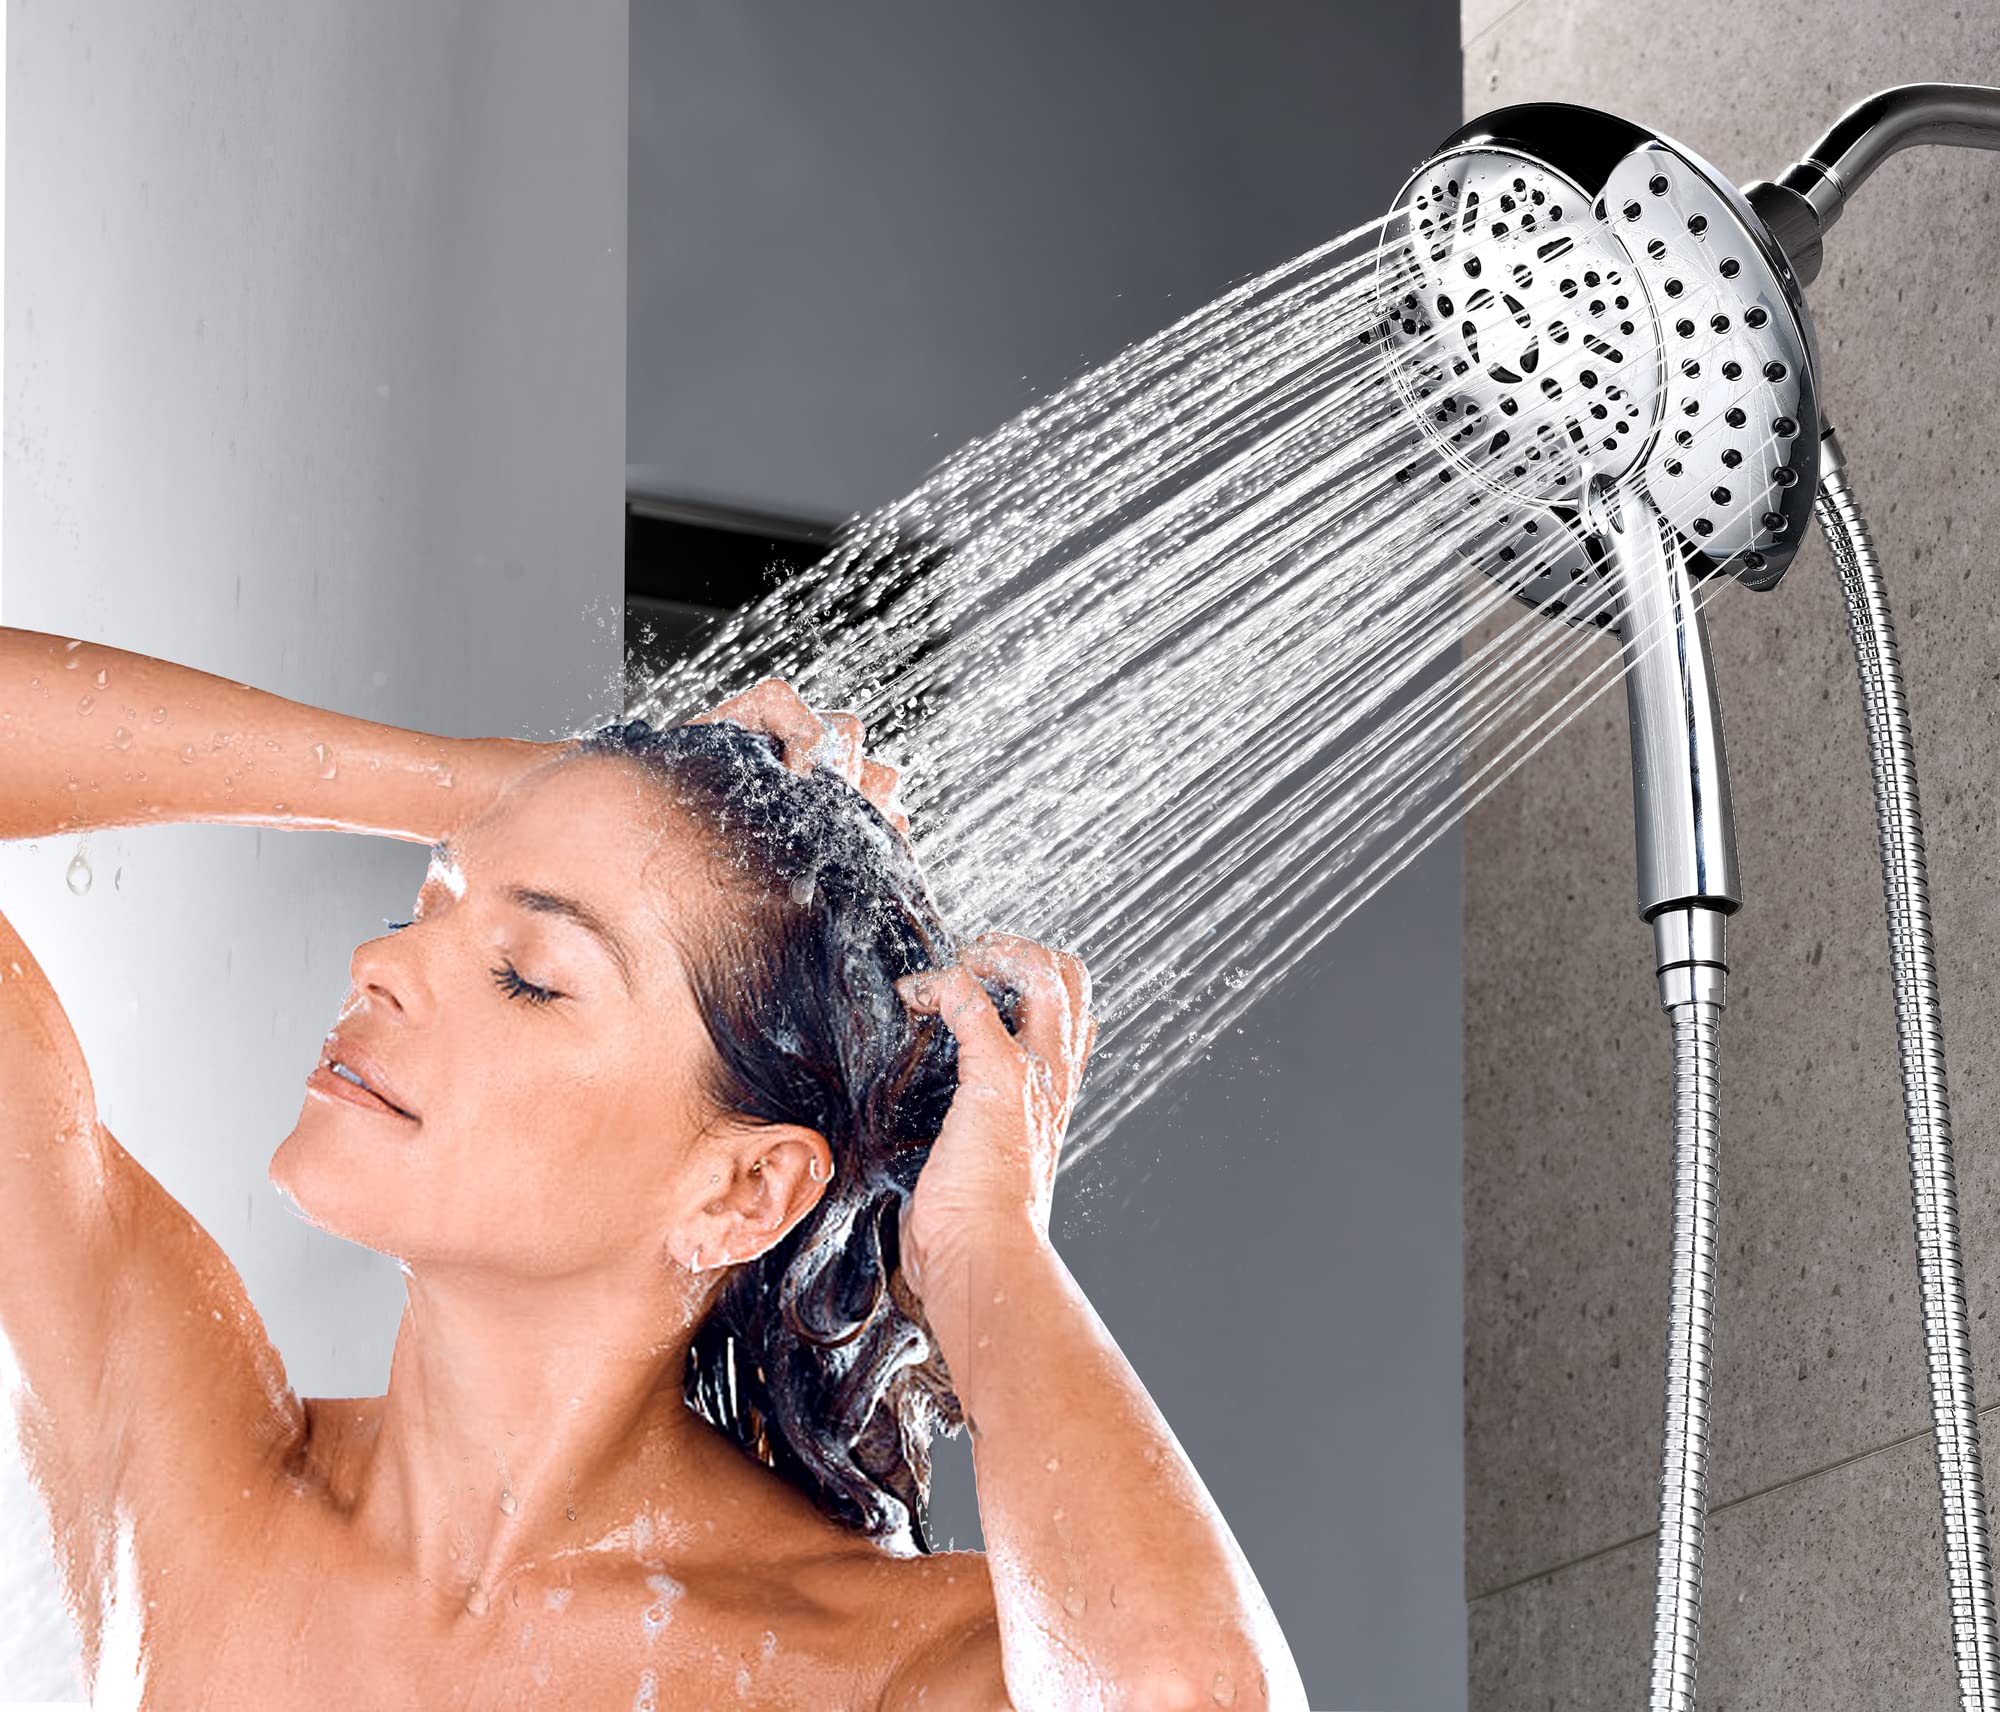 GRICH Dual Shower Head with Handheld: 2 IN 1 High Pressure Handheld Shower Head & Rainfall Shower Head, 9 Spray Modes/Settings Detachable Shower Head with Hose, cUPC and CEC Certification Approved